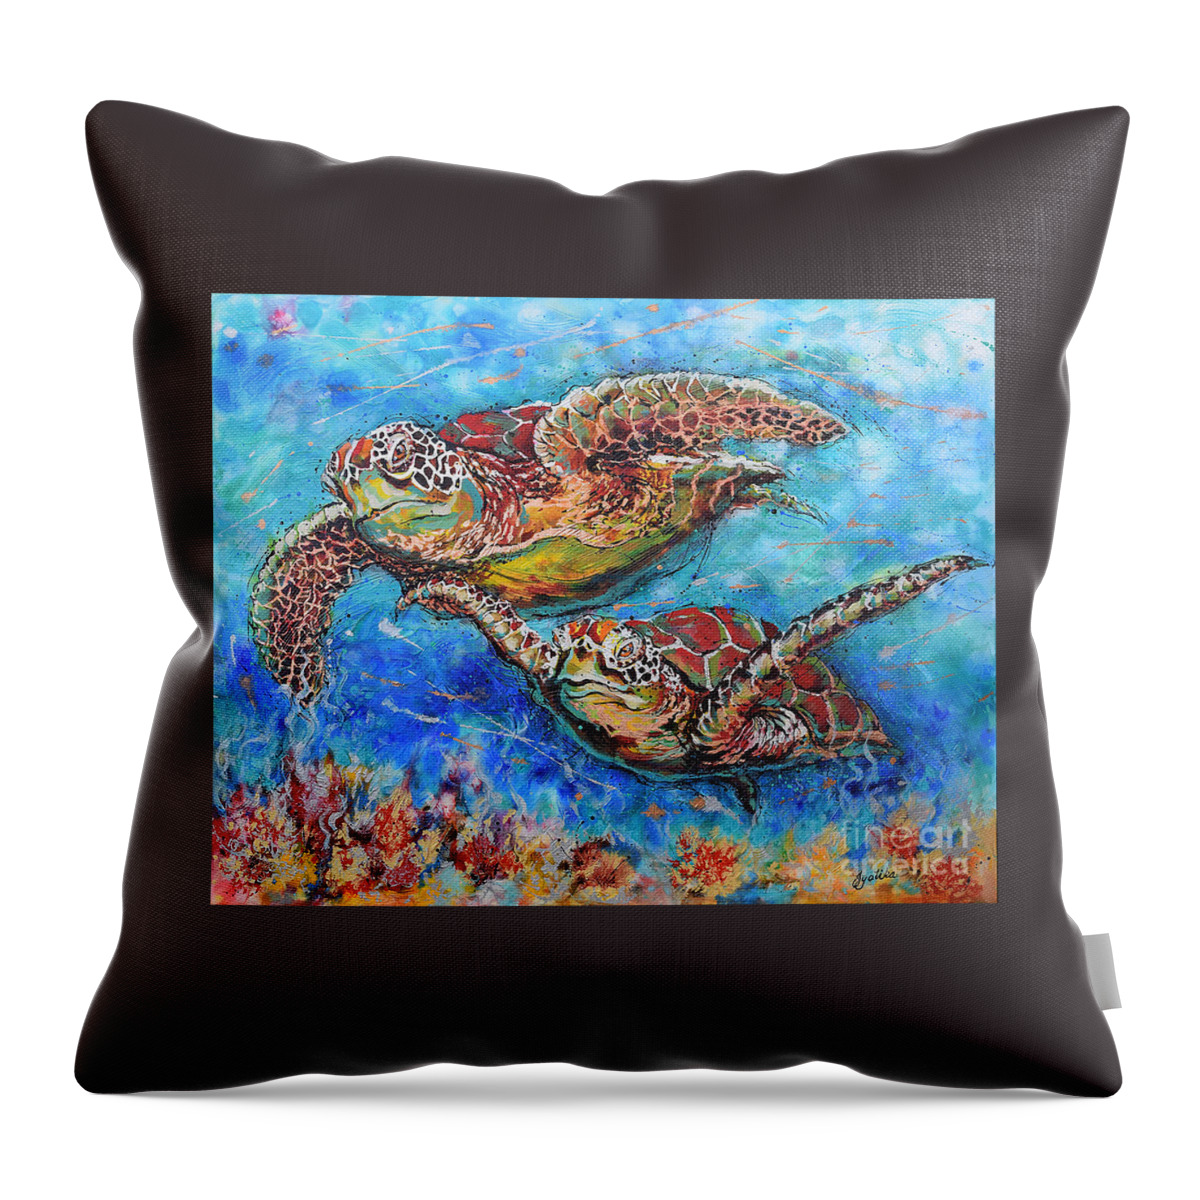 Marine Turtles Throw Pillow featuring the painting Green Sea Turtles by Jyotika Shroff